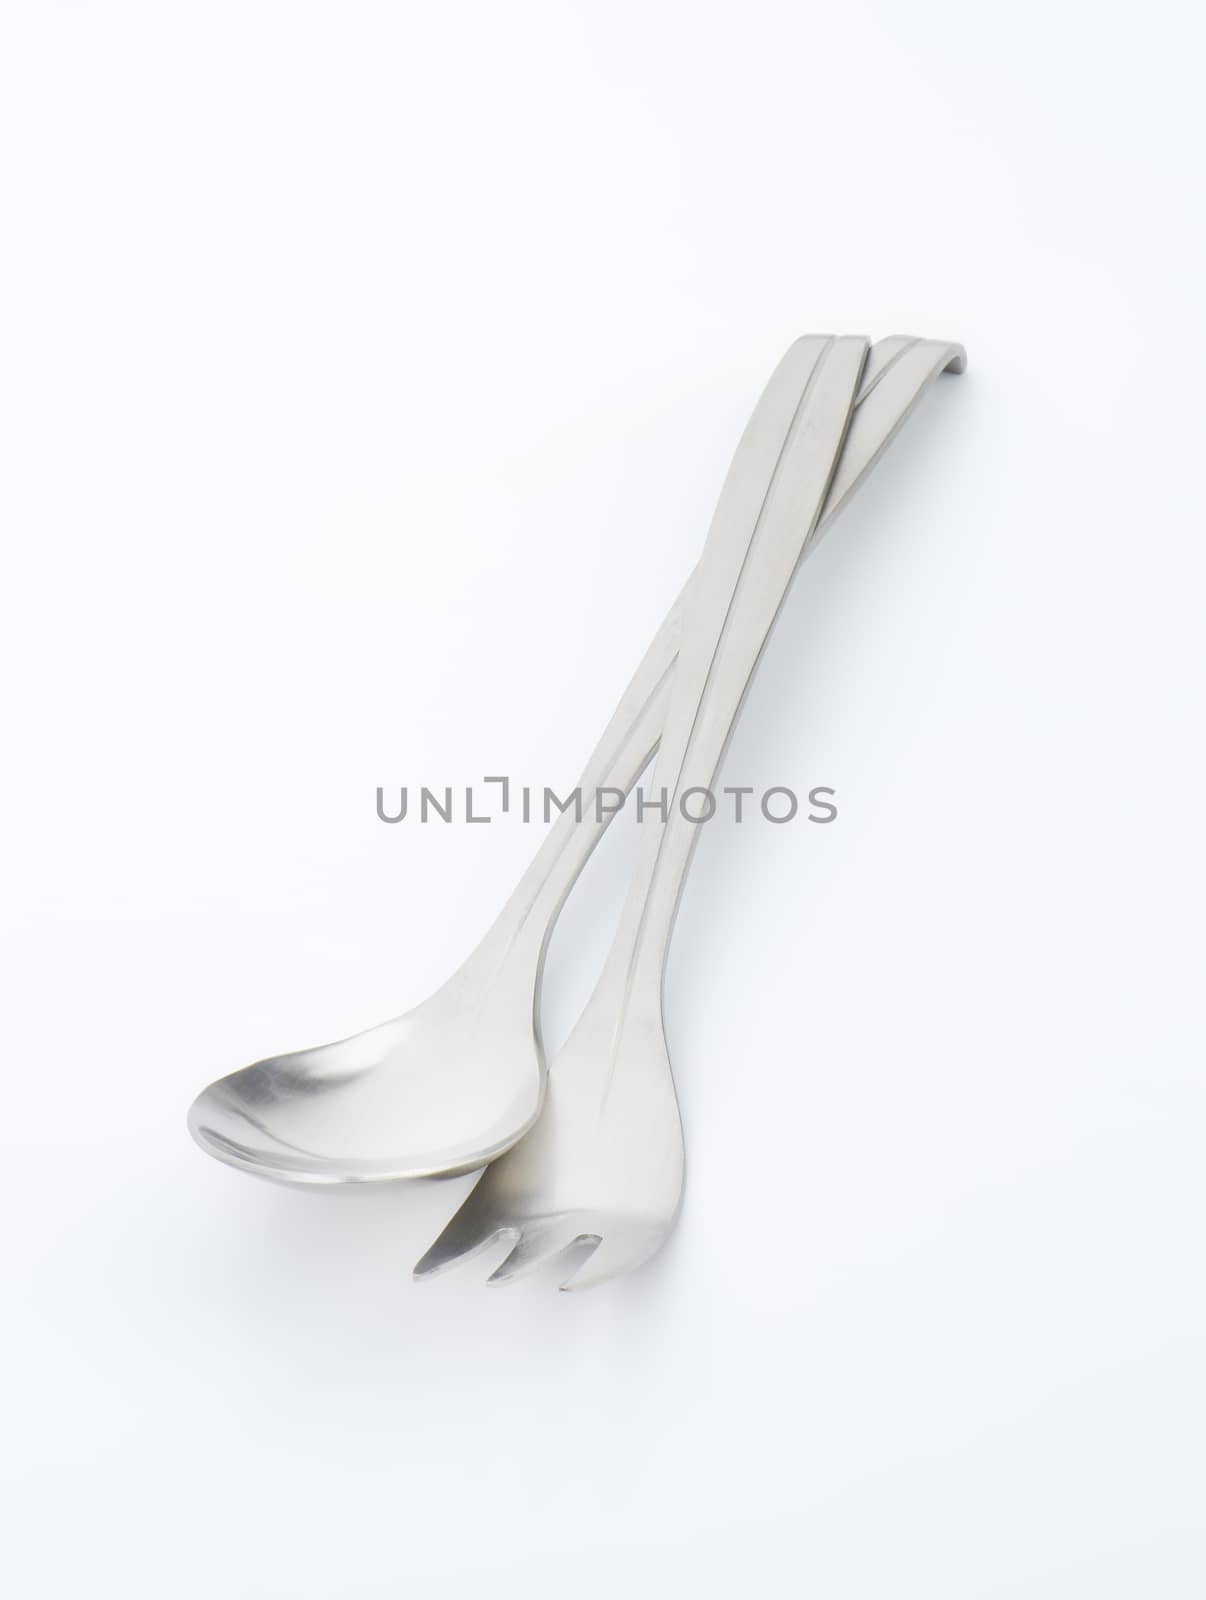 Metal spoon and fork by Digifoodstock